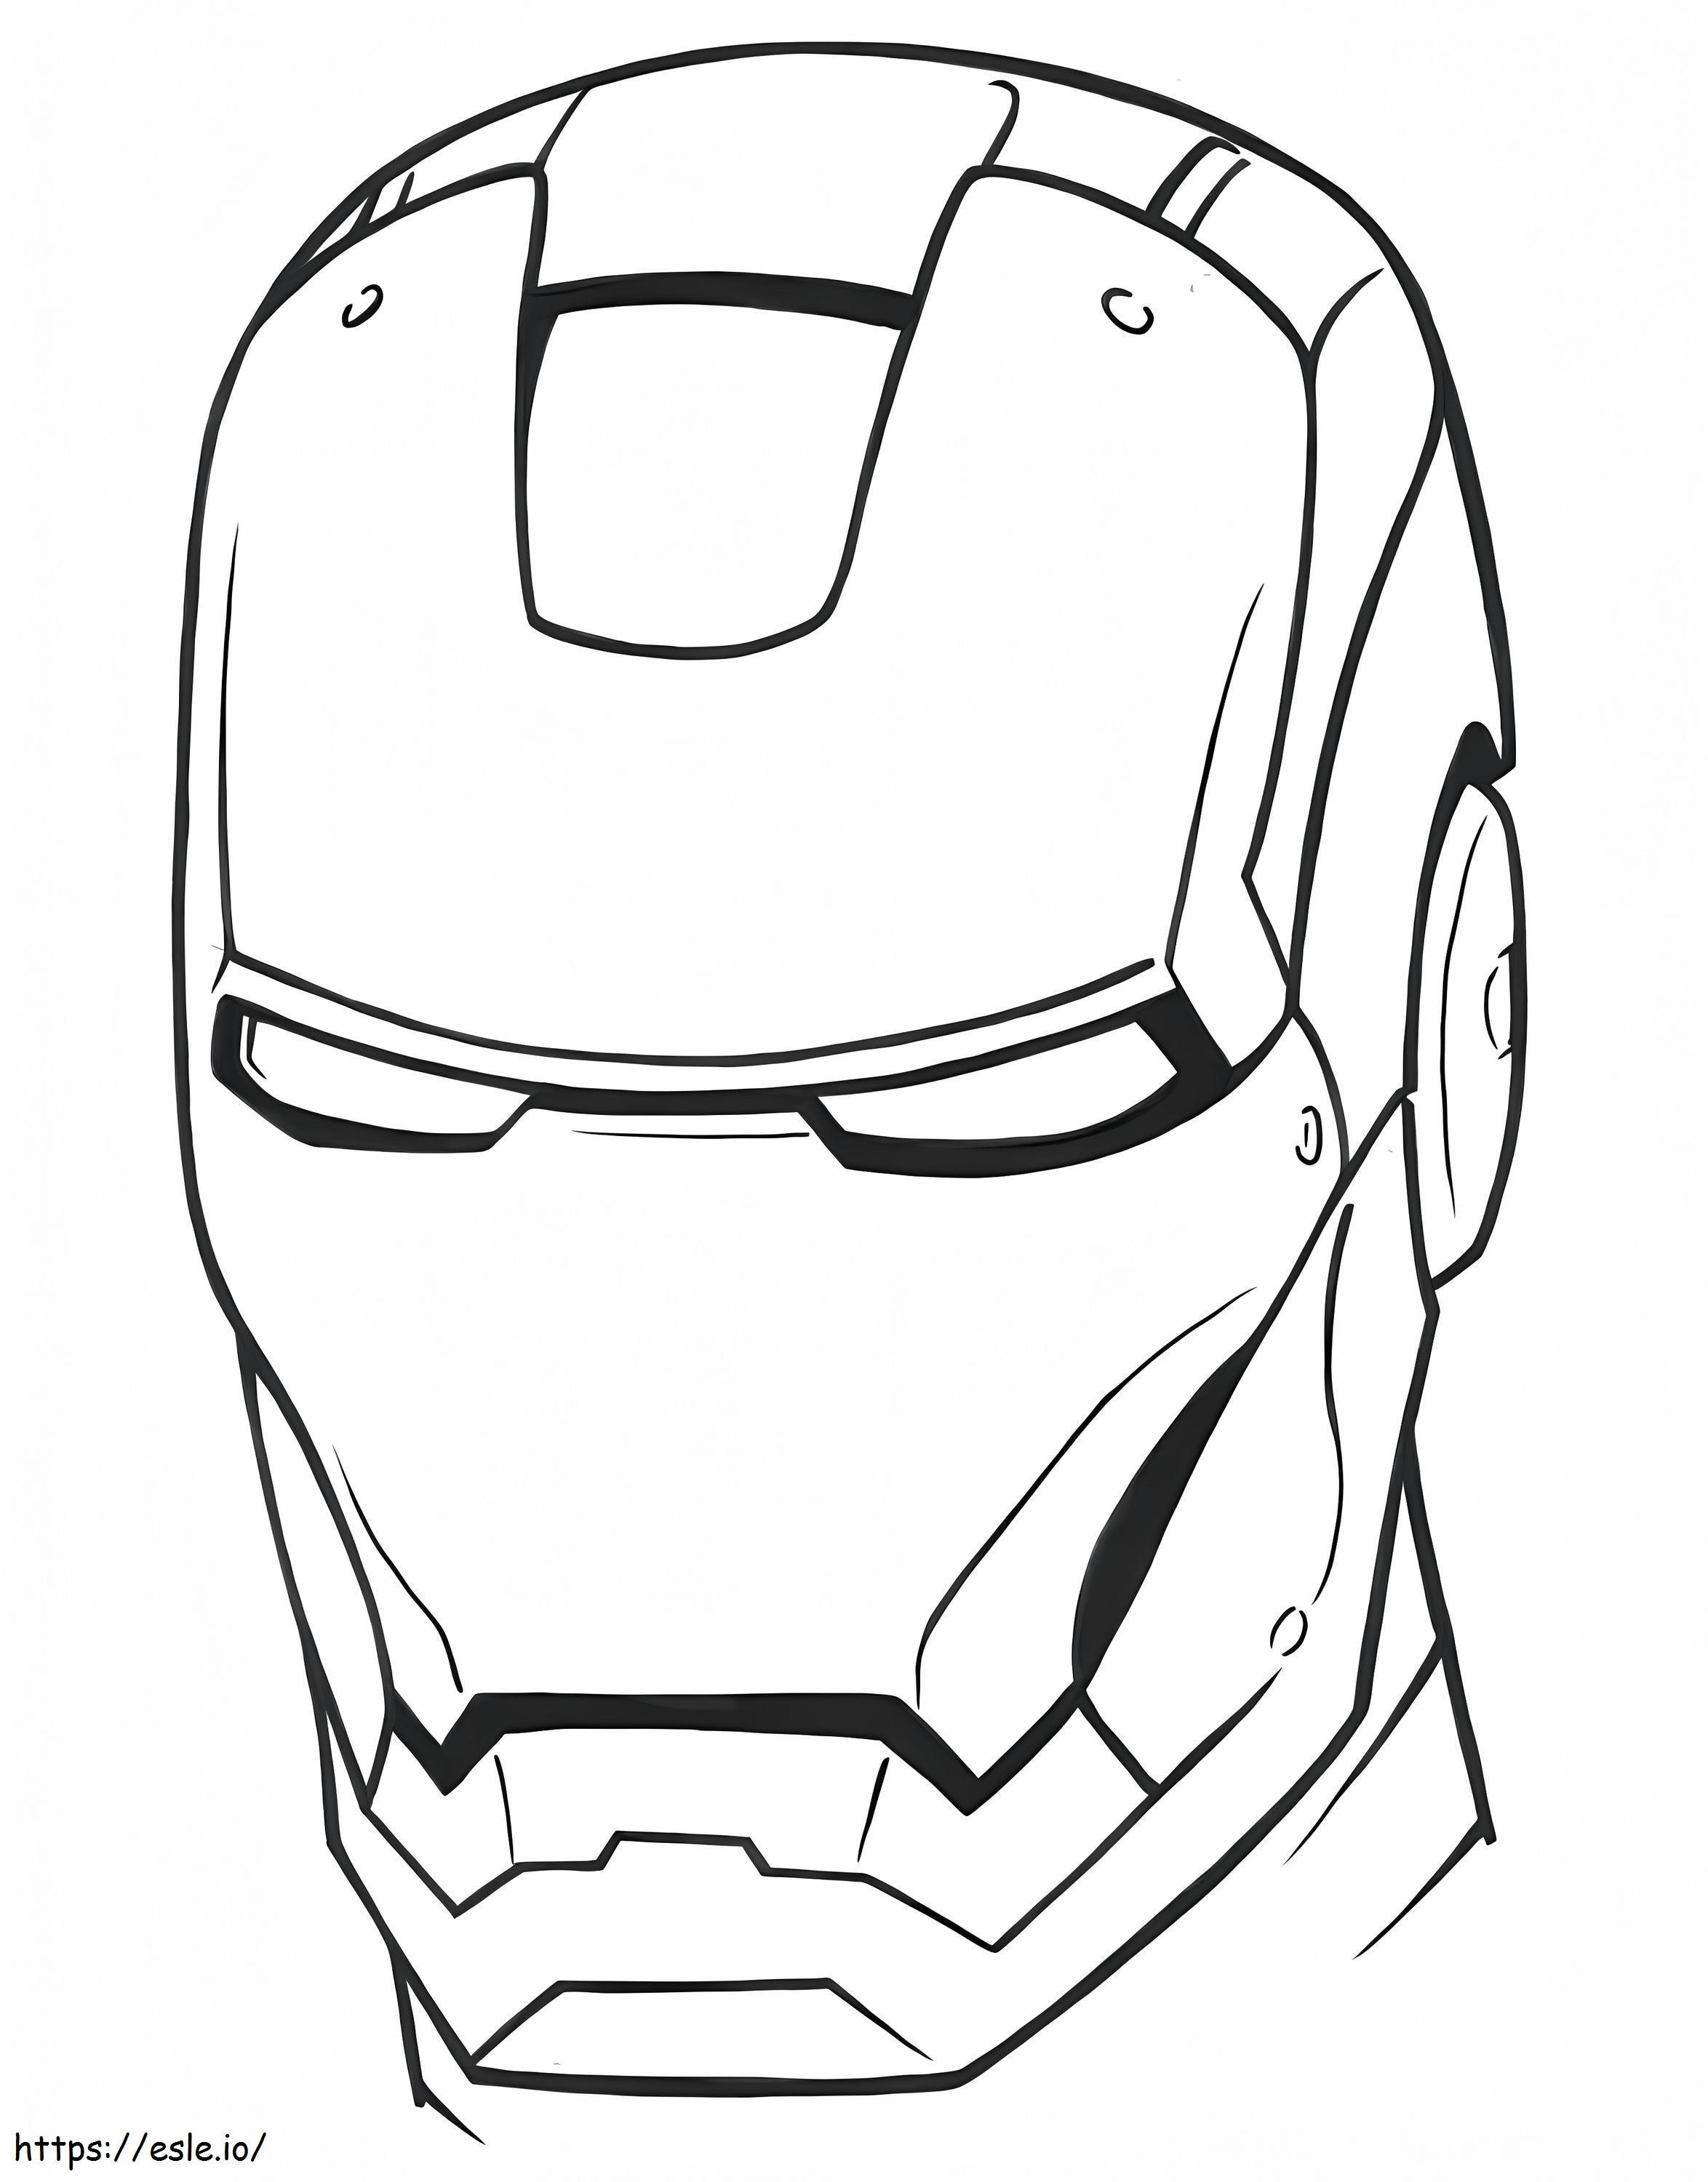 Iron Man Mask coloring page